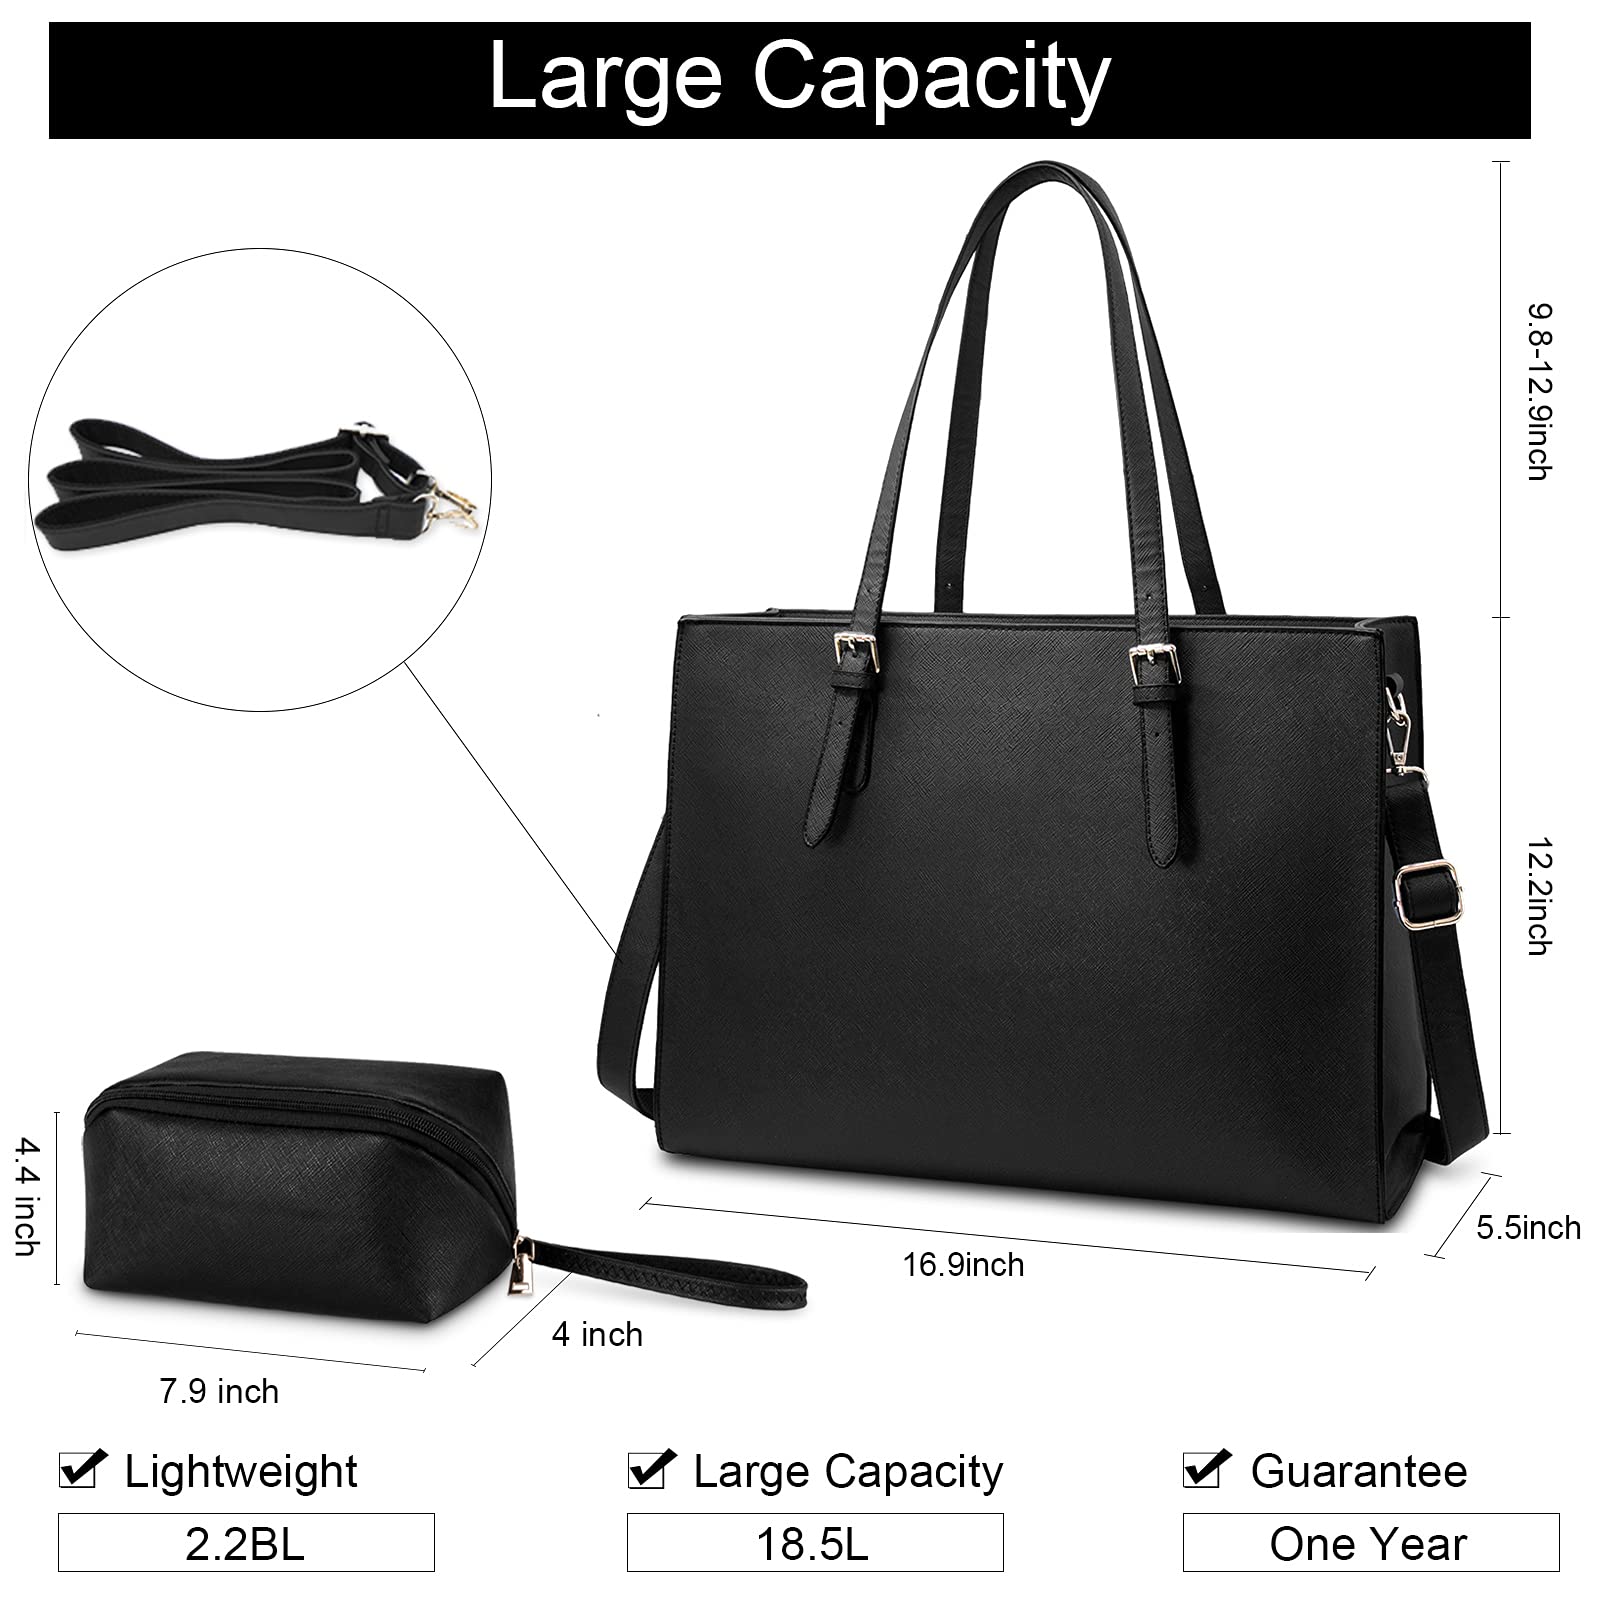 NUBILY Laptop Bag for Women Waterproof Lightweight Leather 15.6 inch Computer Tote Bag Business Office Briefcase Large Capacity Handbag